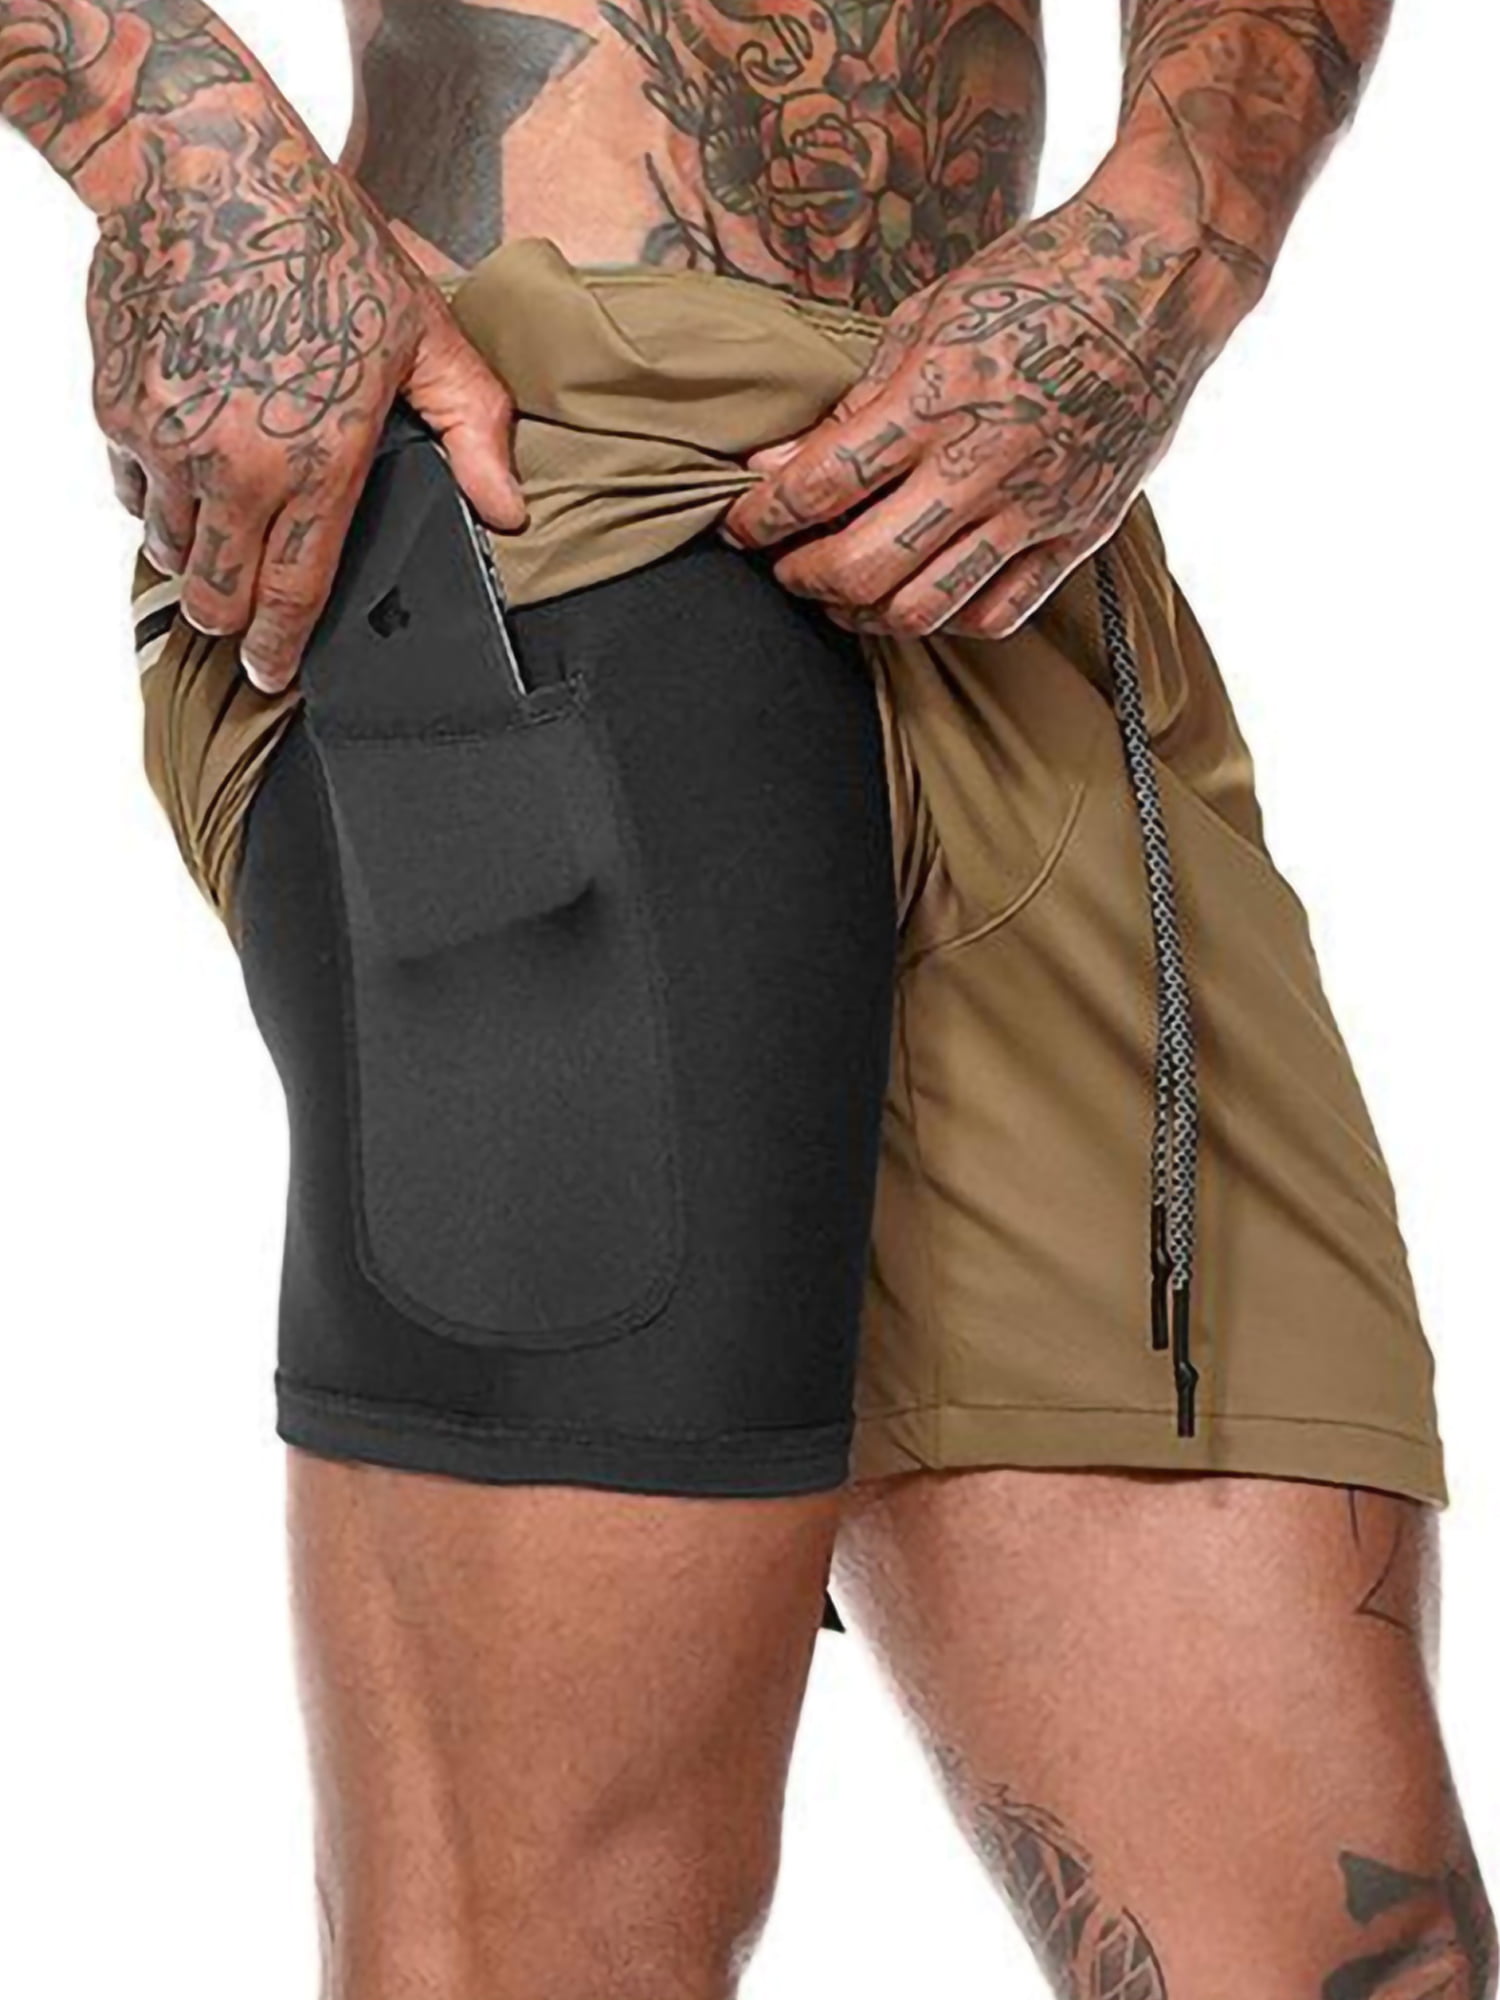 RIOJOY Mens 2-in-1 Bodybuilding Workout Shorts Lightweight Gym Training Shorts Running Athletic Shorts with Zipper Pockets